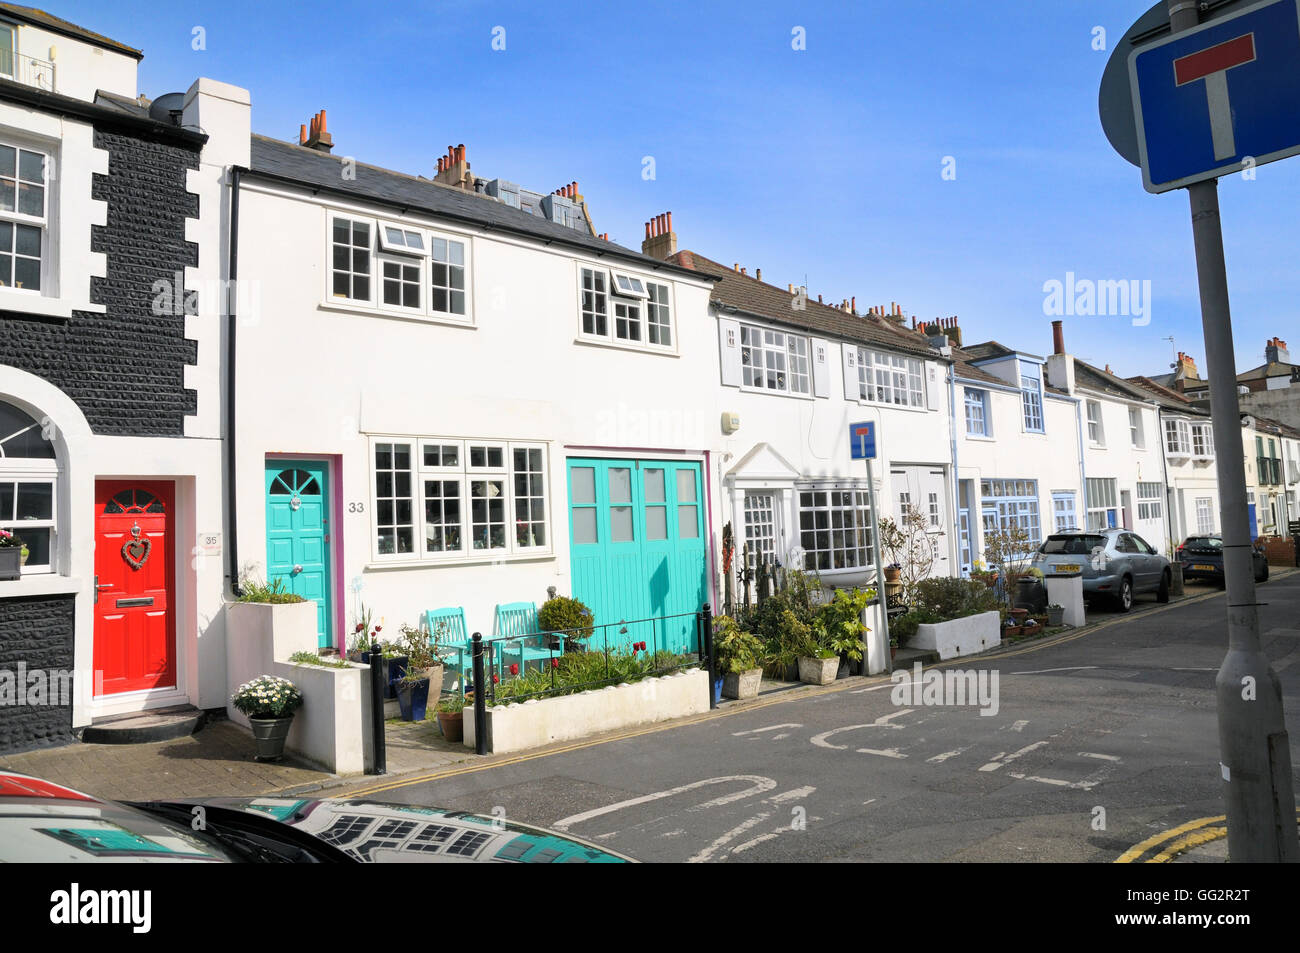 Dudley Mews, Brunswick Street West, Hove, Brighton & Hove, East Sussex, England, UK Stockfoto